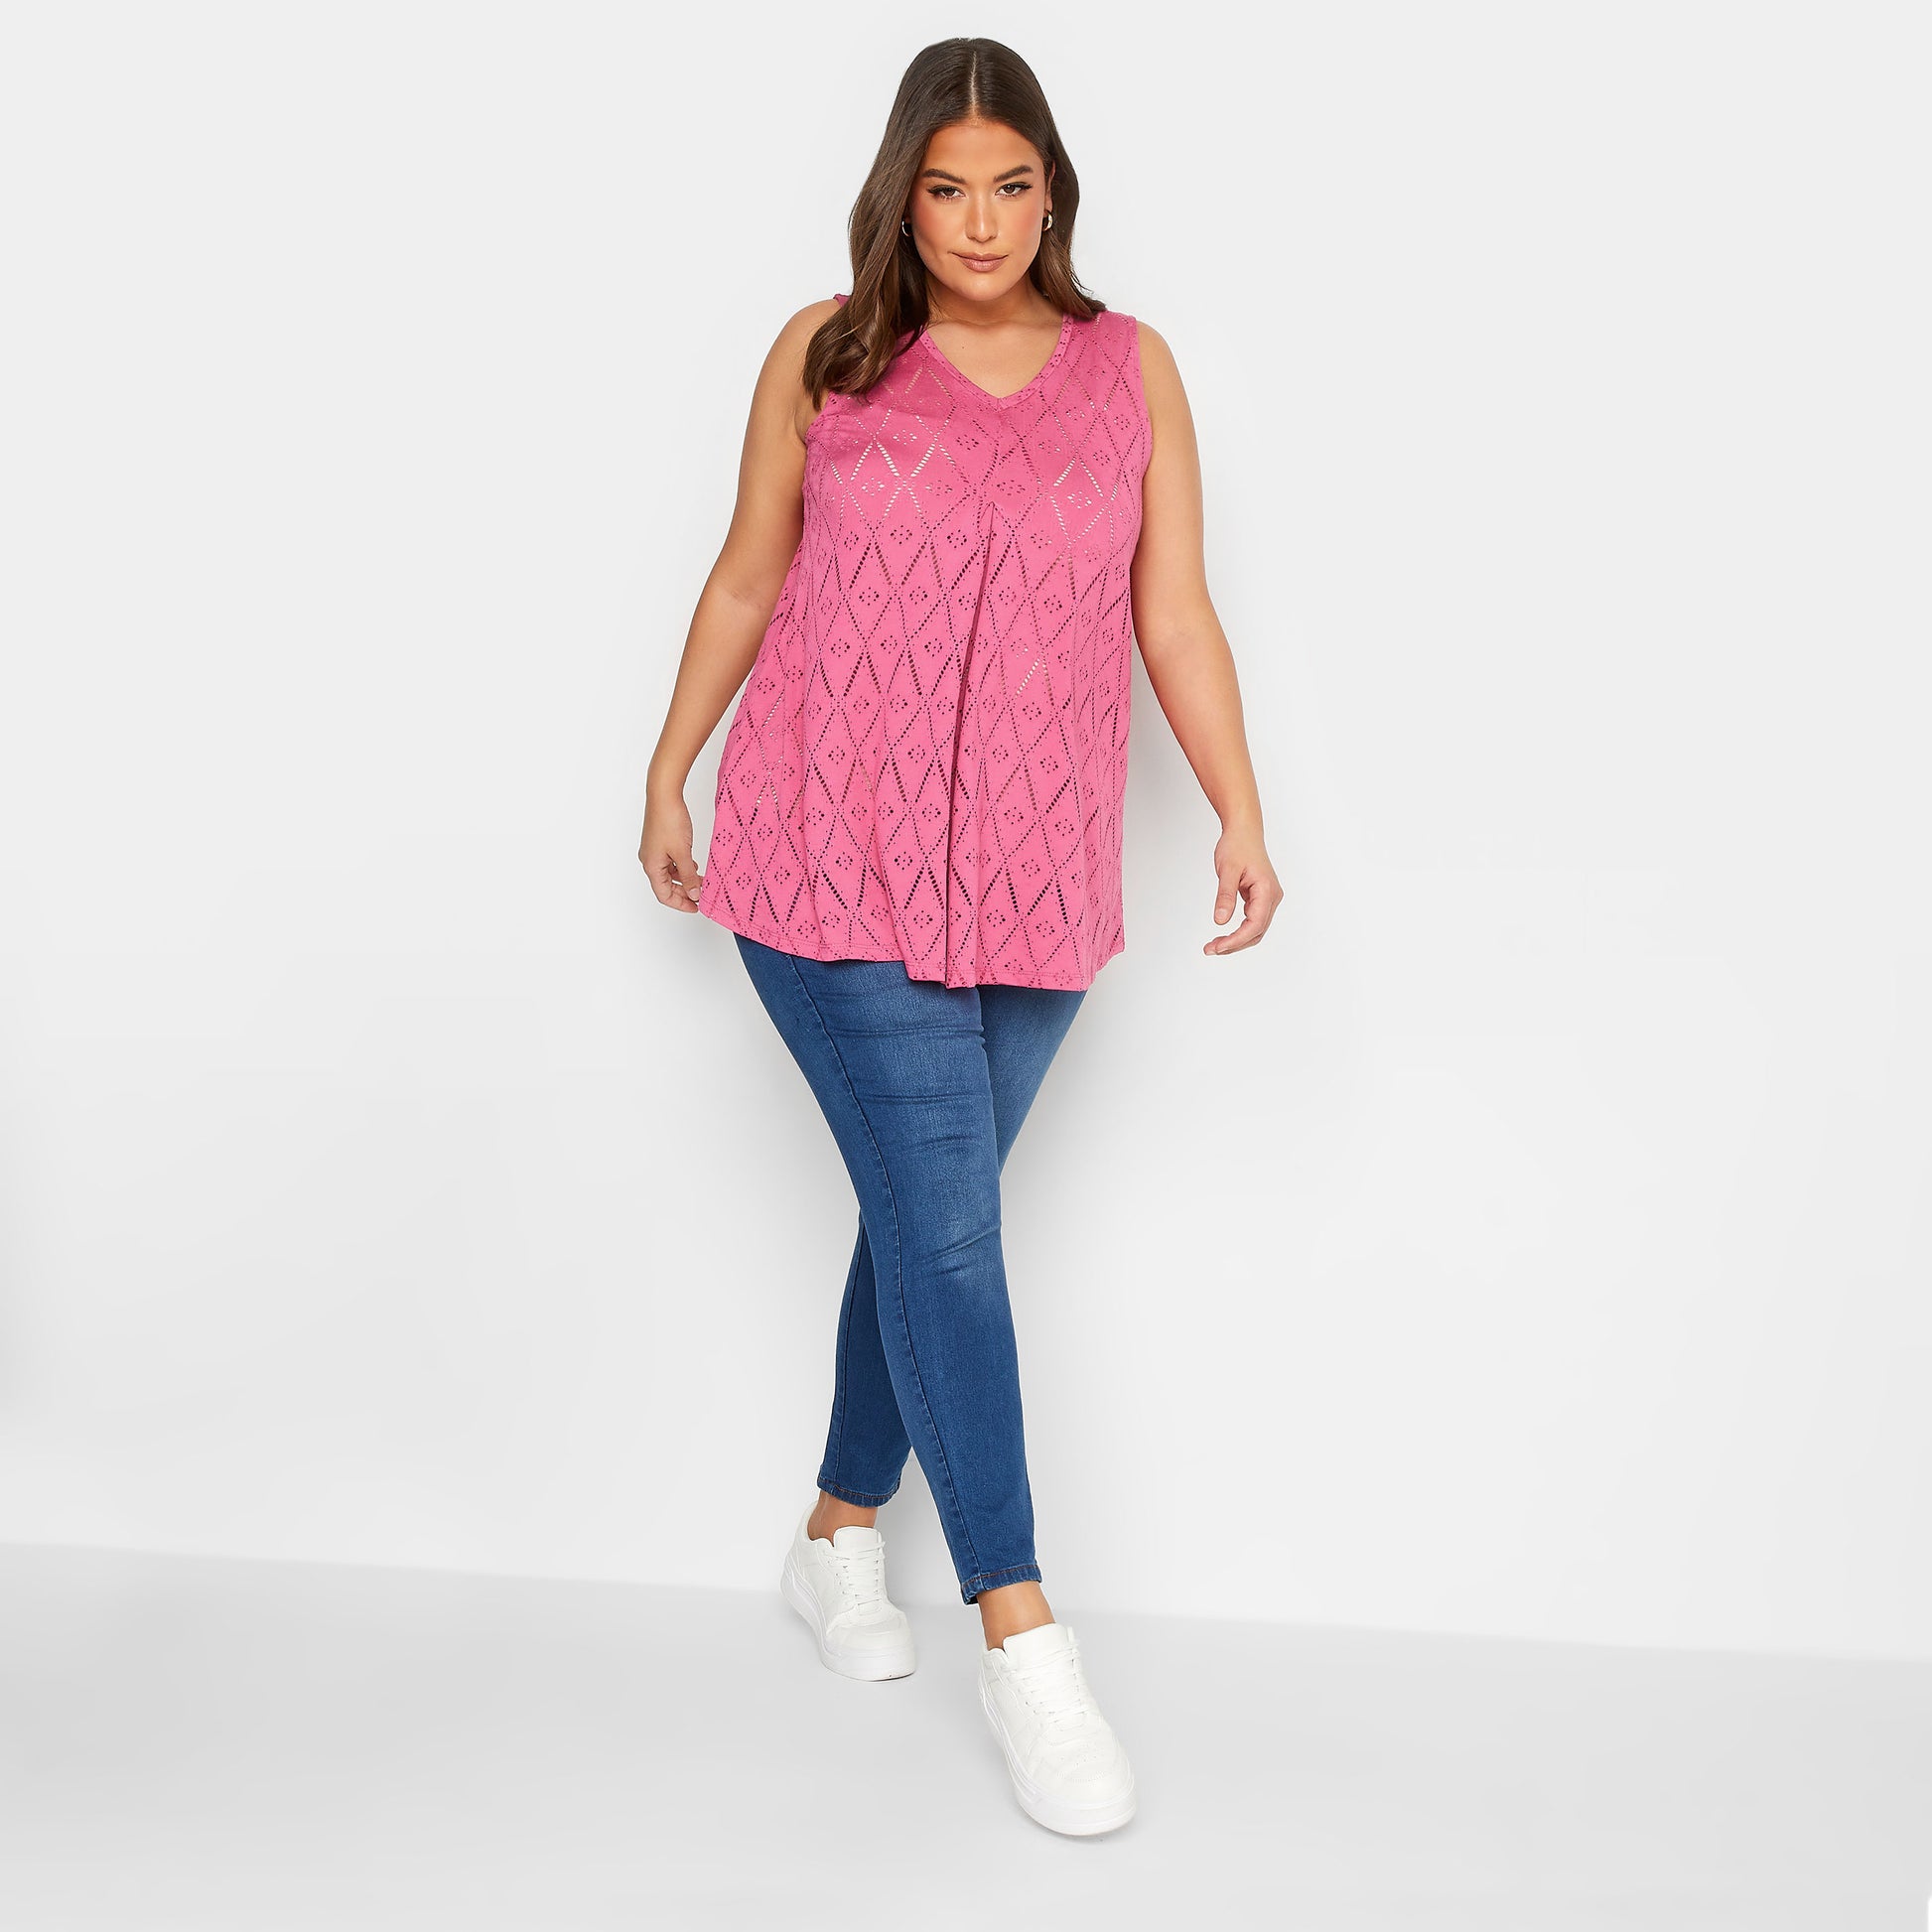 YoPink Broderie Anglaise Swing Vest Top